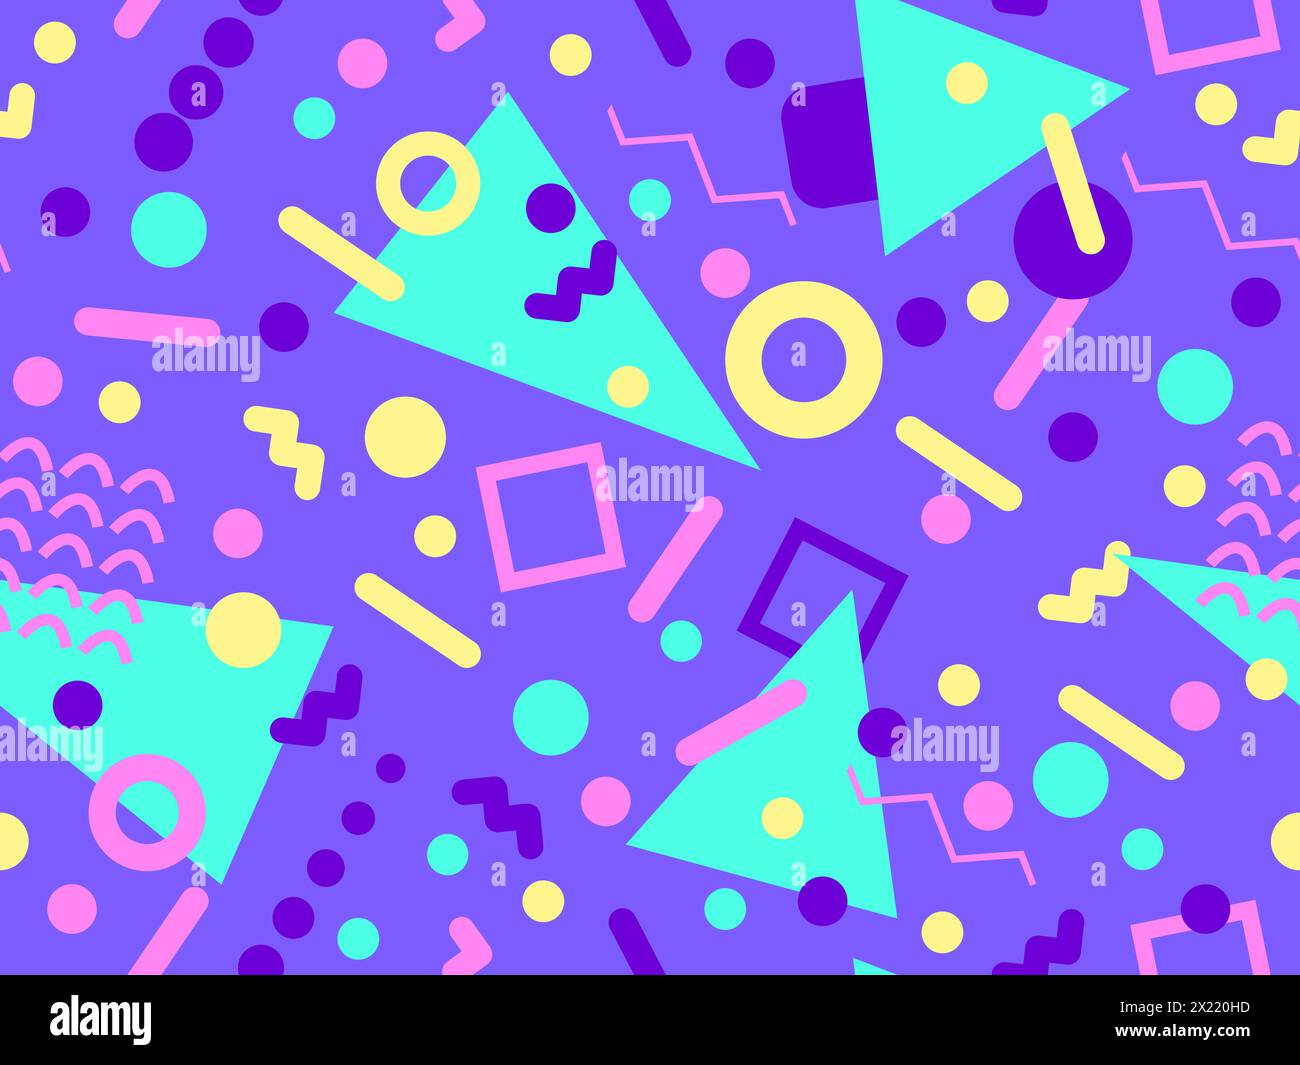 Memphis seamless pattern with geometric shapes in 80s and 90s style. Geometric shapes of different shapes and colors. Design of promotional products, Stock Vector